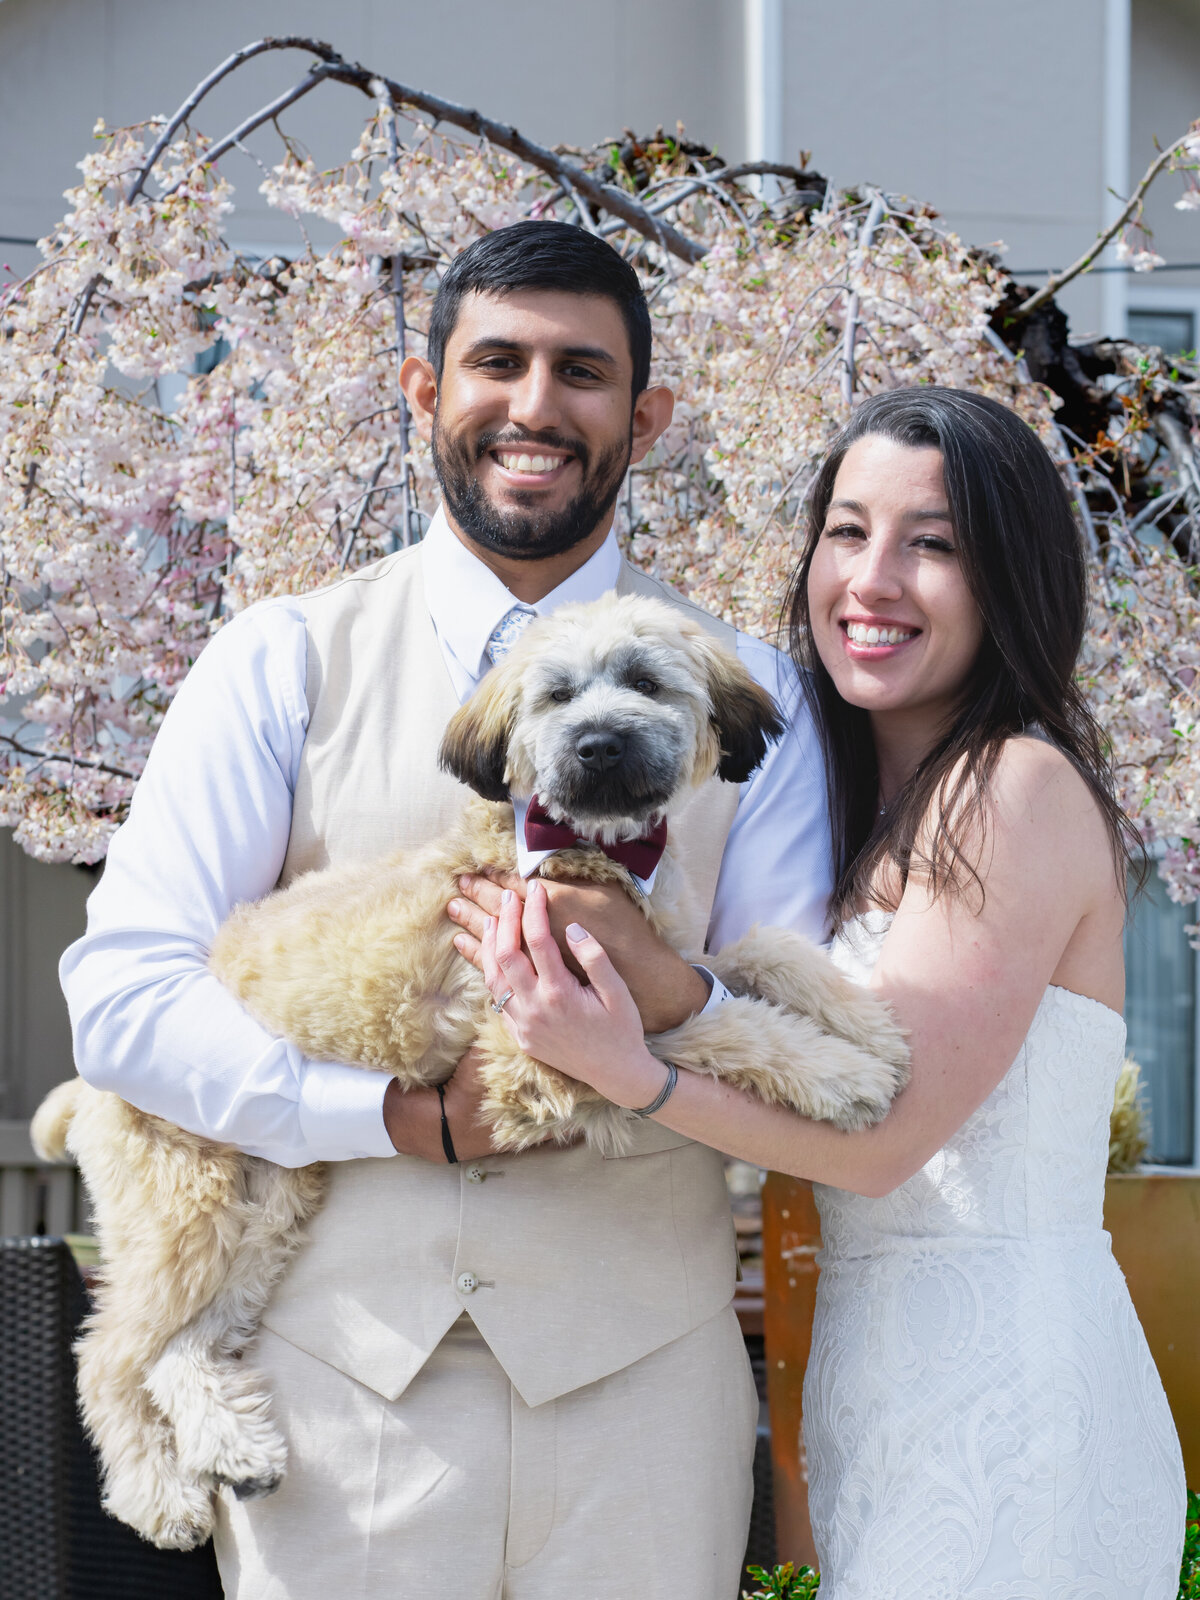 Cute wedding couple portrait with a puppy in San Francisco. 4Karma Studio wedding photography and video